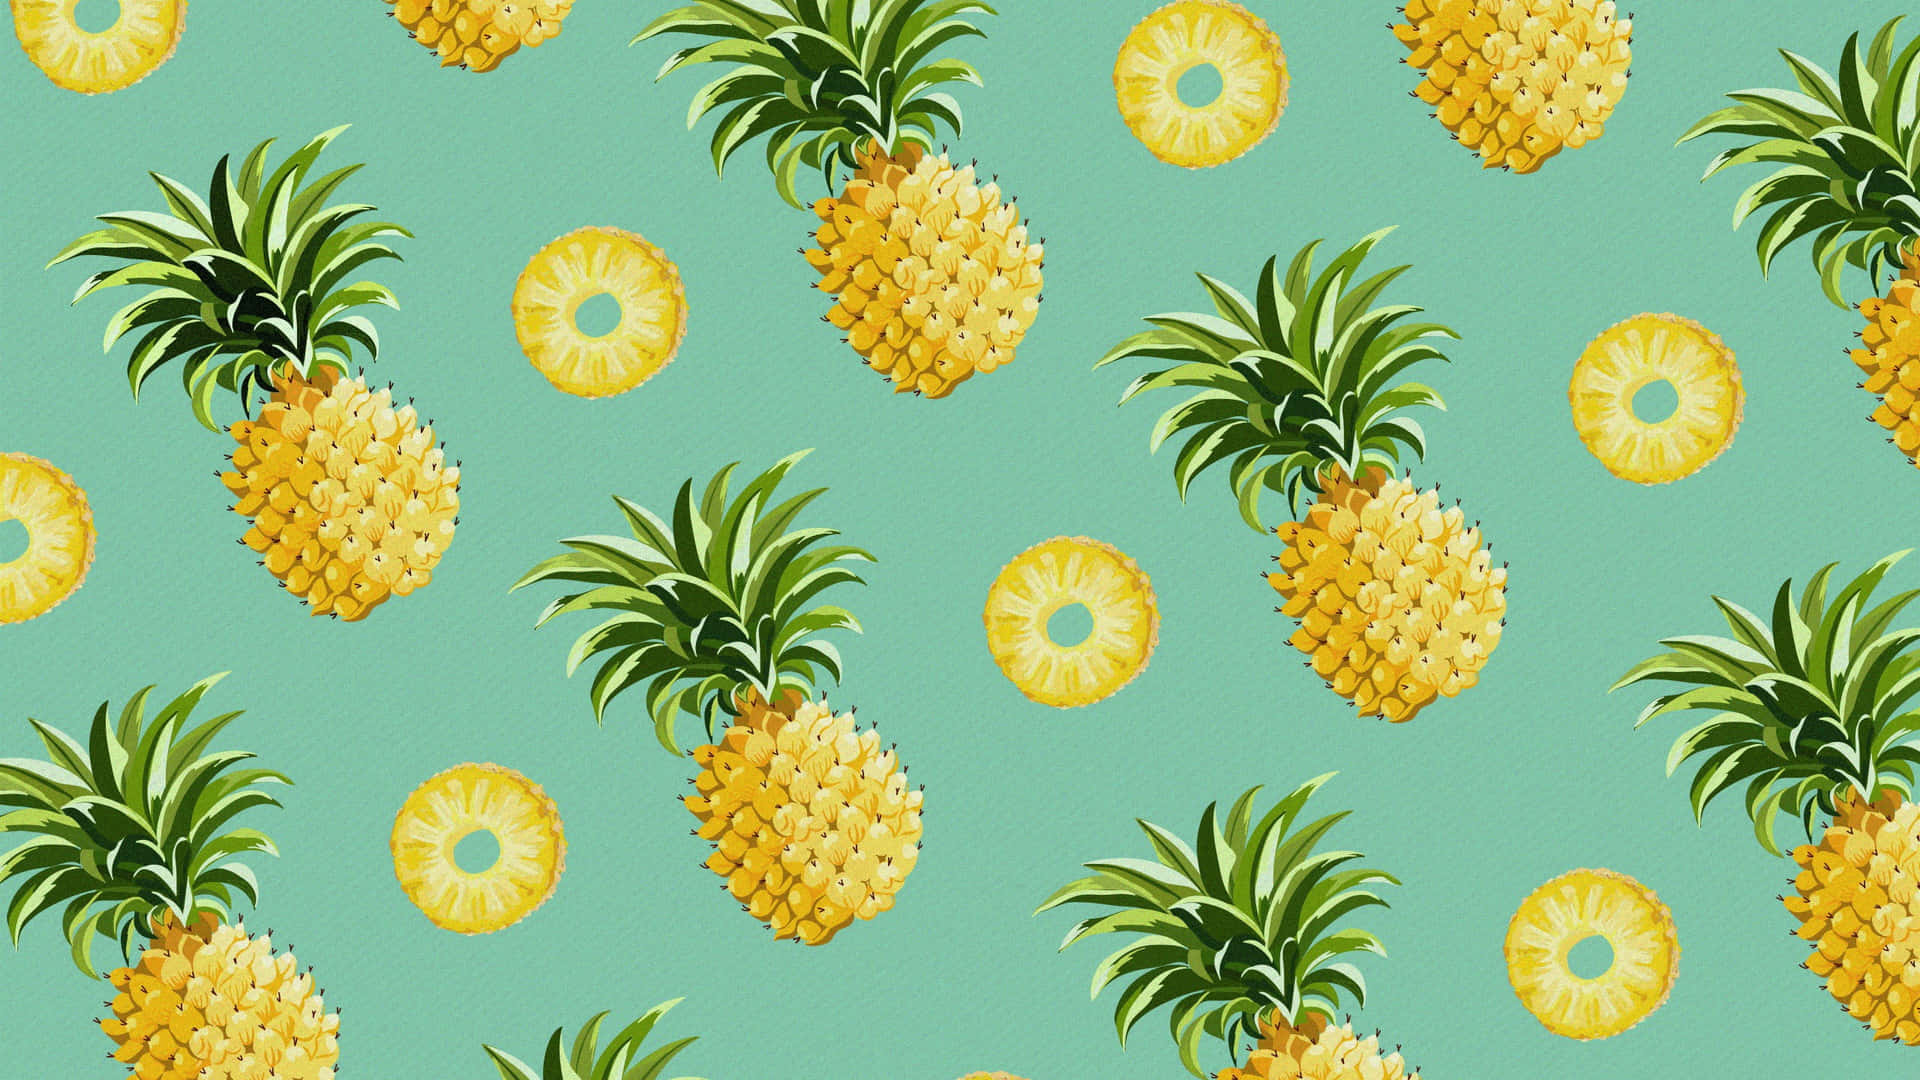 HD Pattern Pineapple Fruits Slices Wallpaper